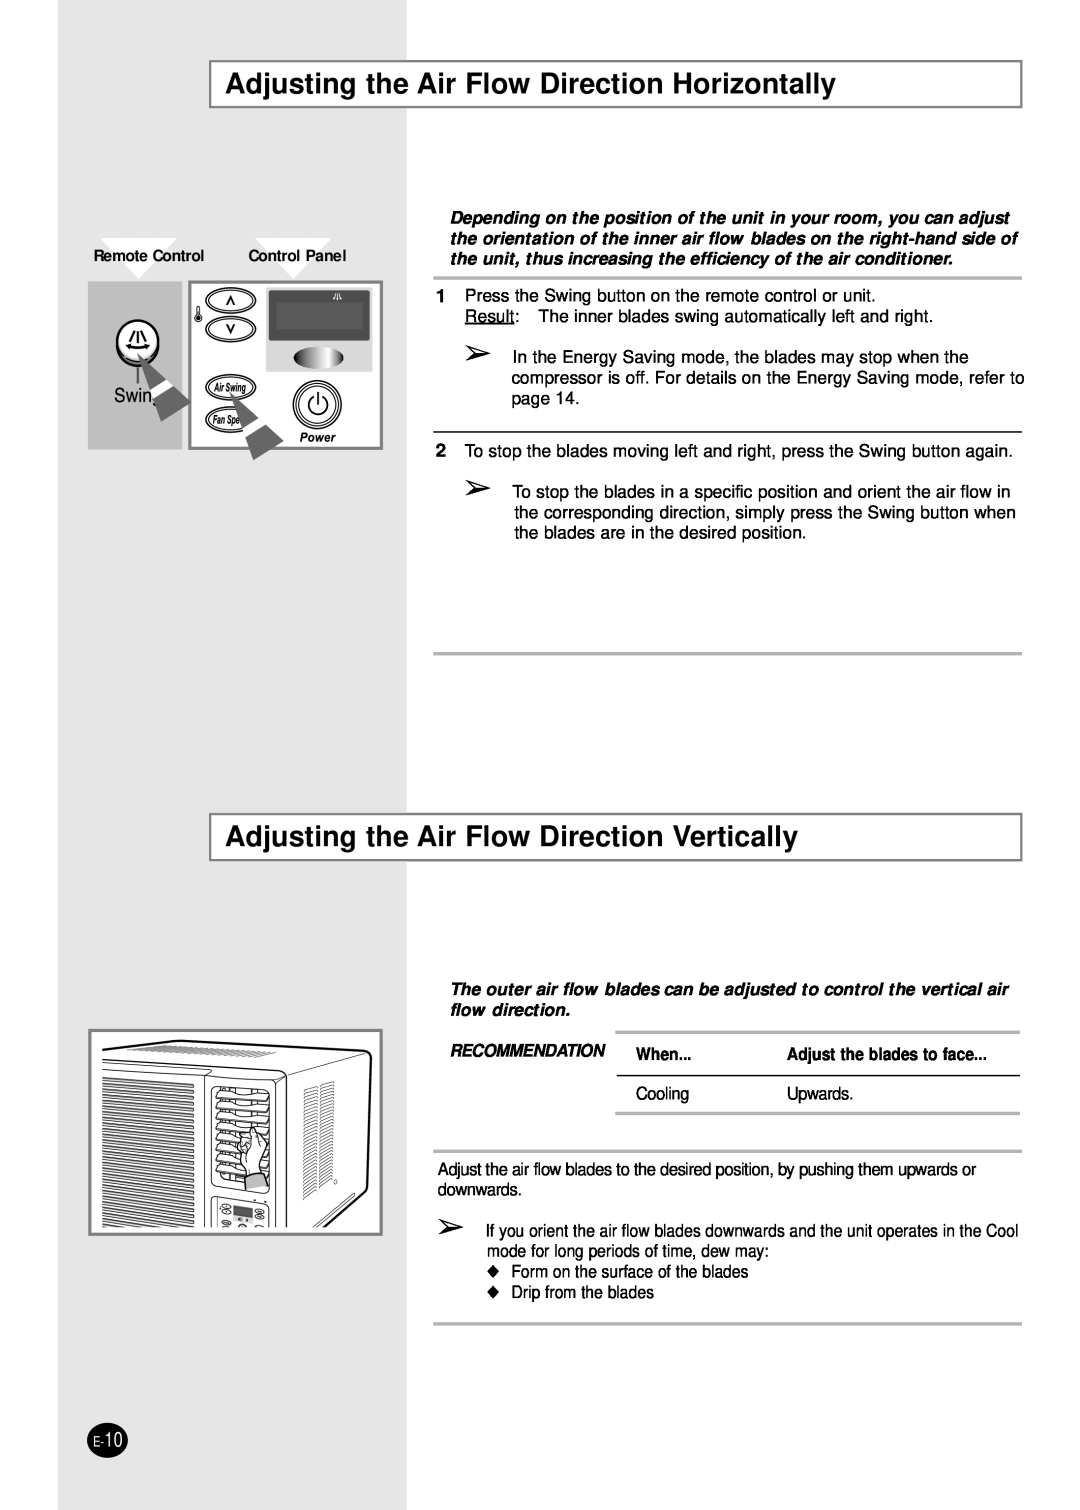 Samsung Model AW089AB manual Adjusting the Air Flow Direction Horizontally, Adjusting the Air Flow Direction Vertically 